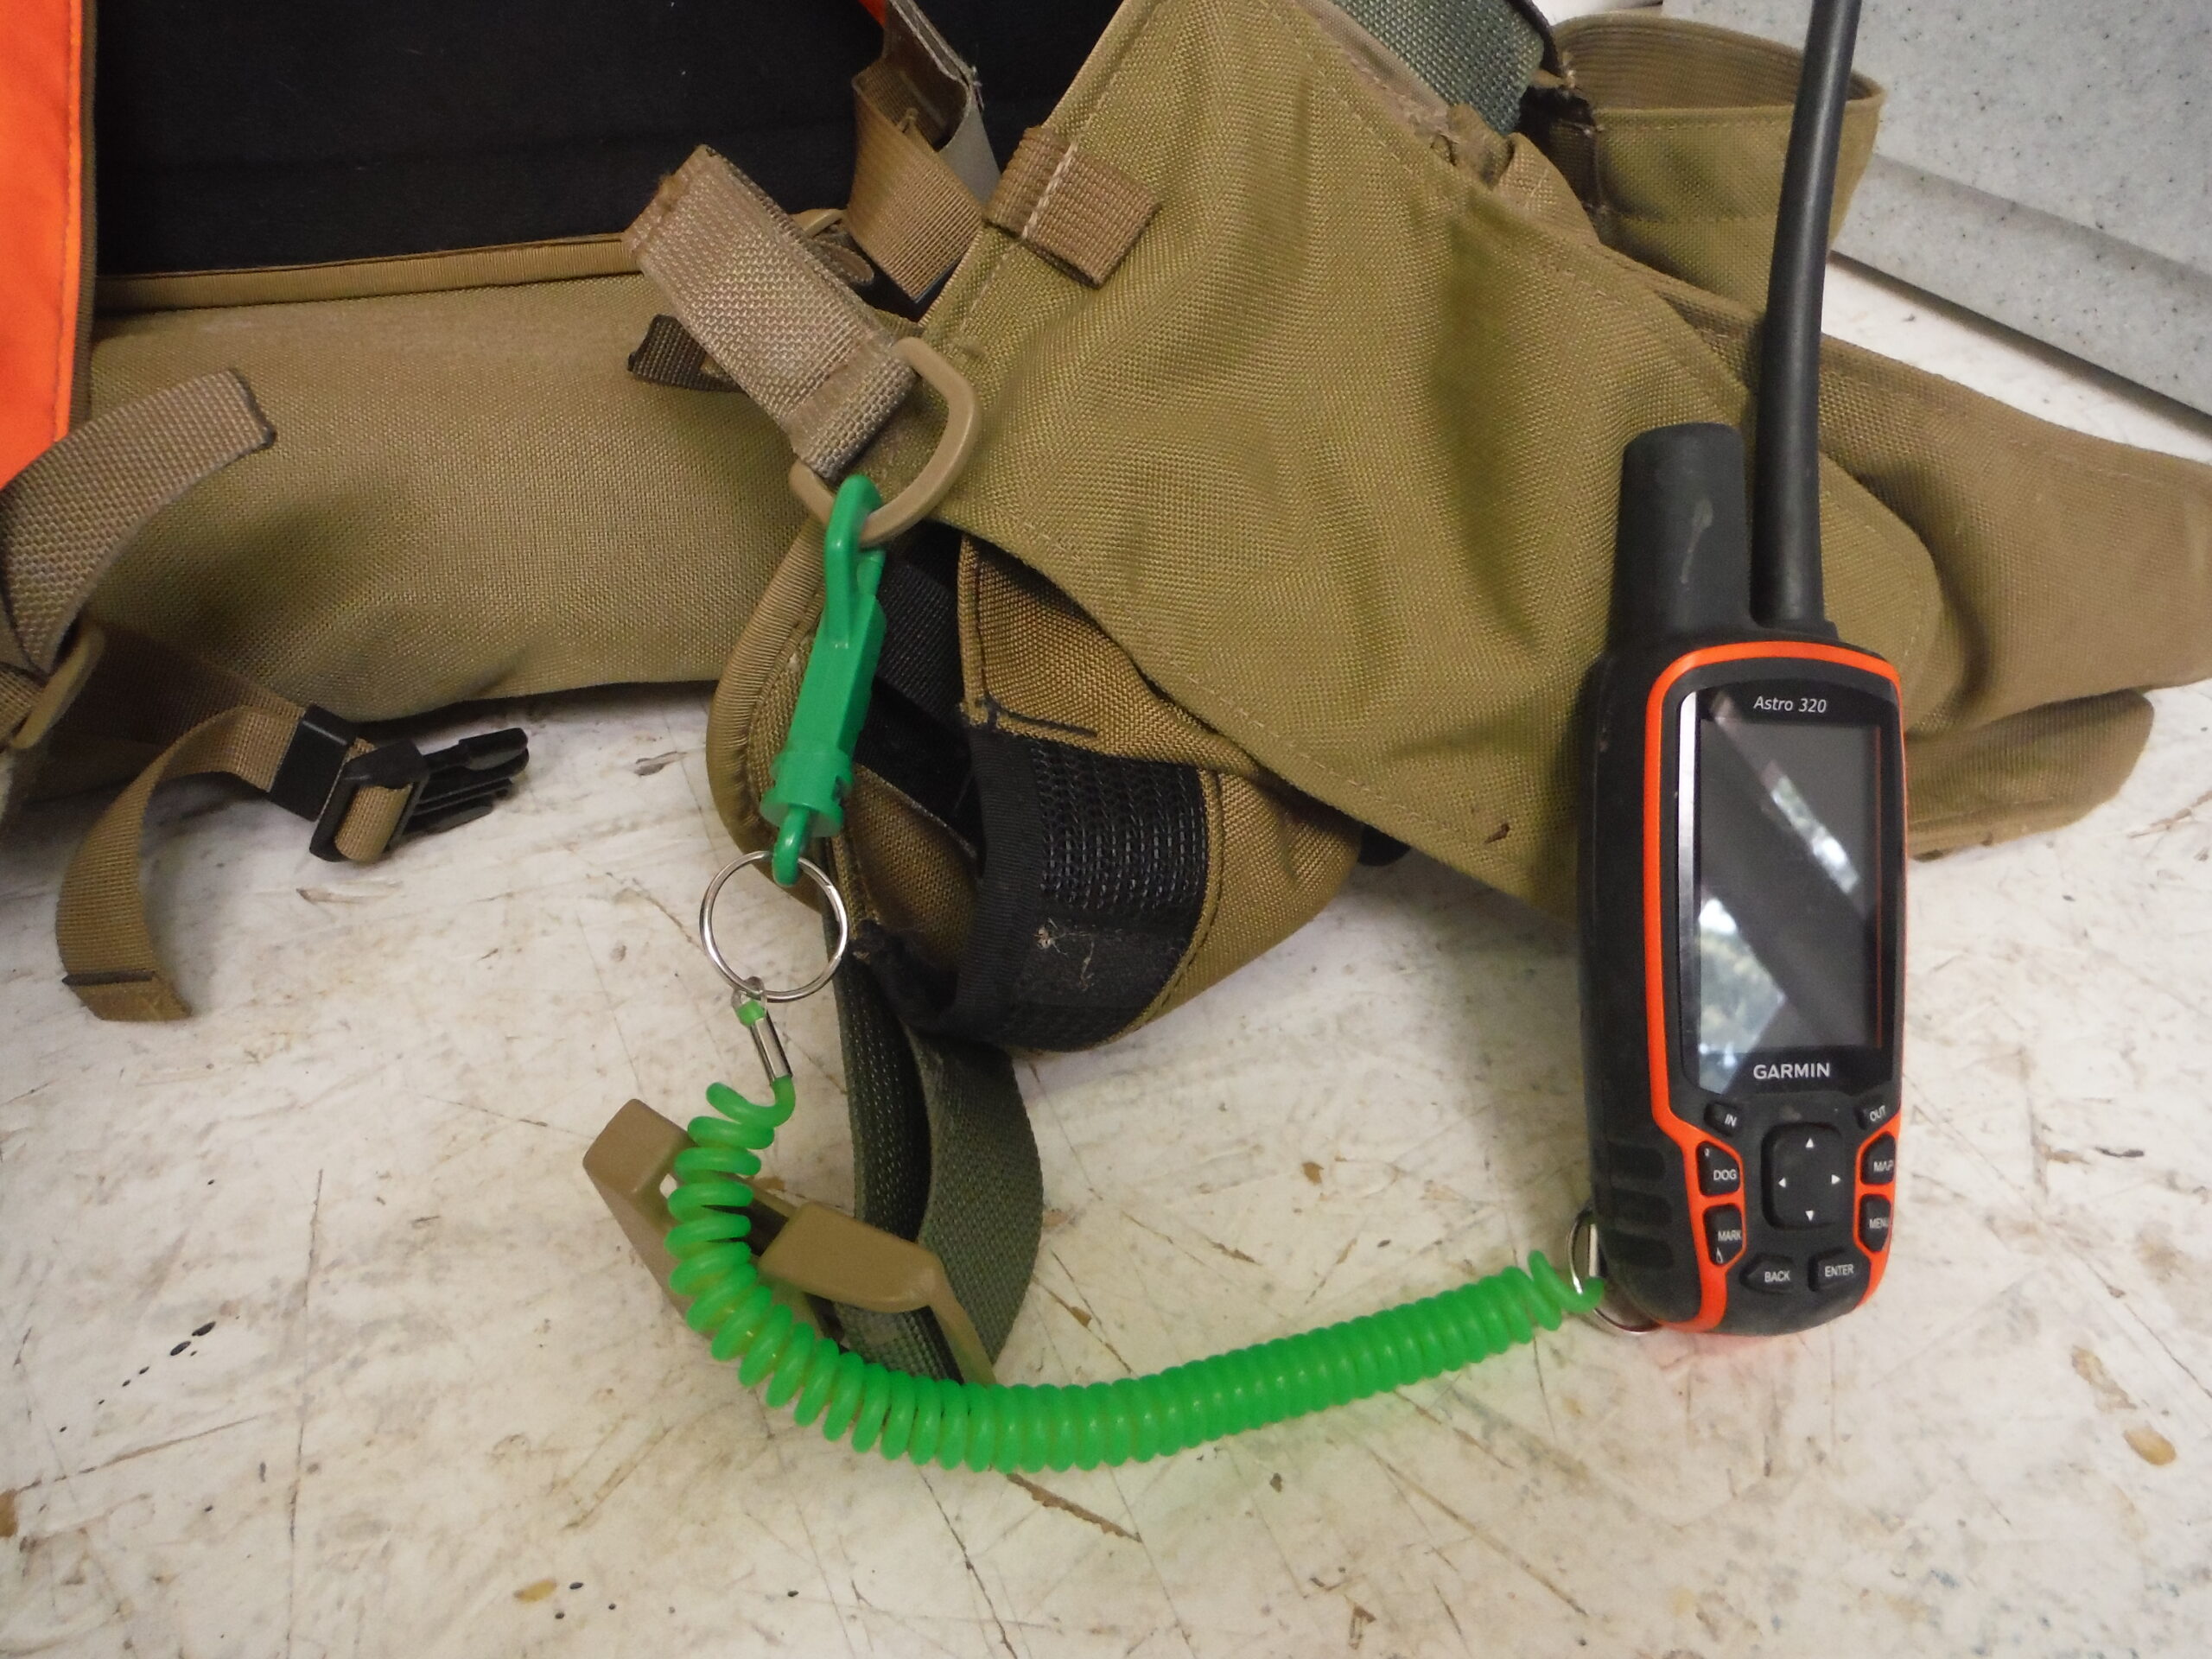 Why You Should Tether All Your Gear to Your Bird Vest